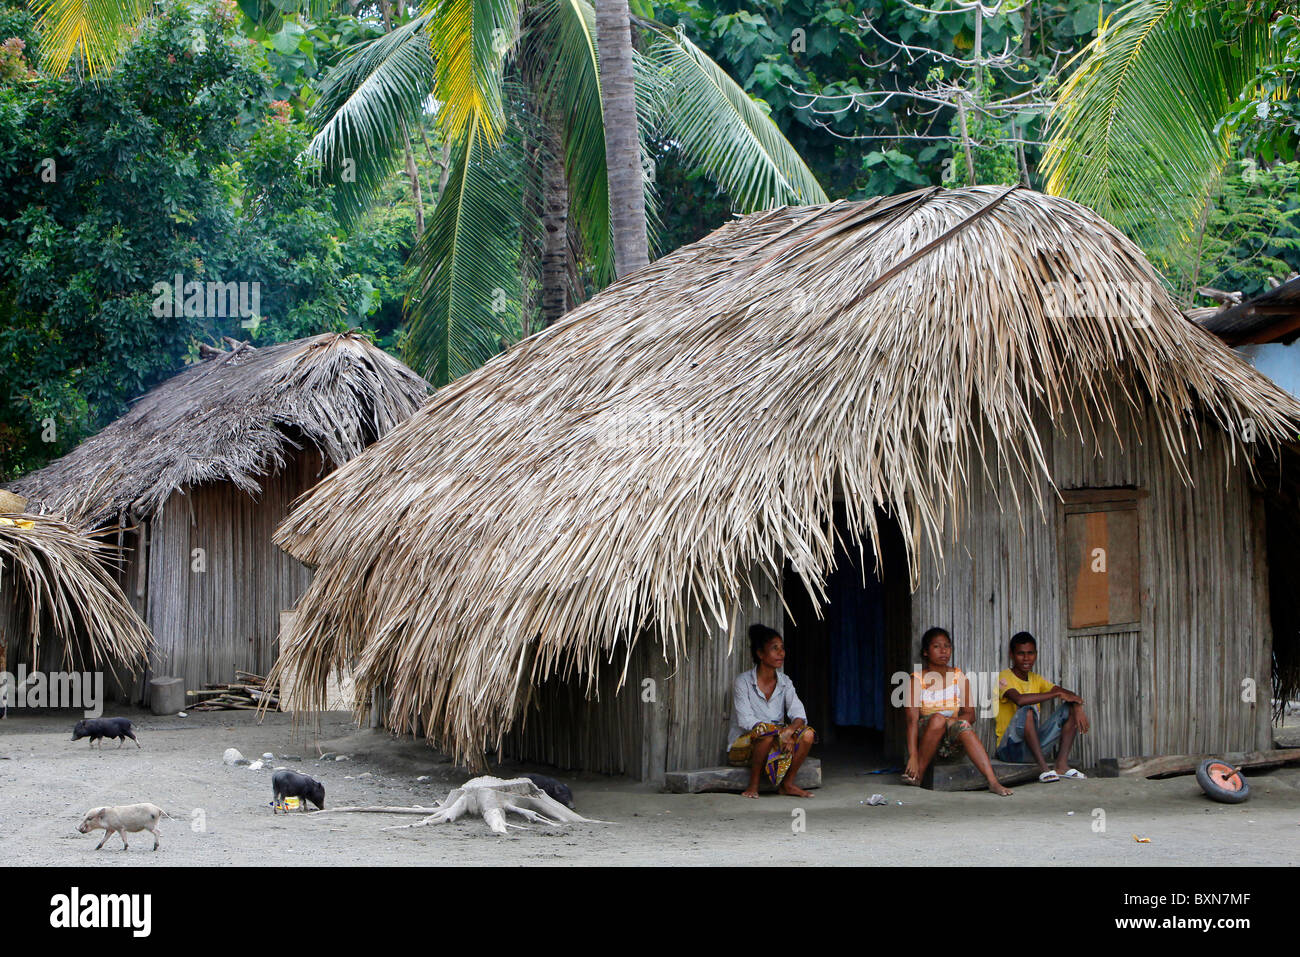 Thatched roof huts in a village in Timor Leste (East Timor) Stock Photo